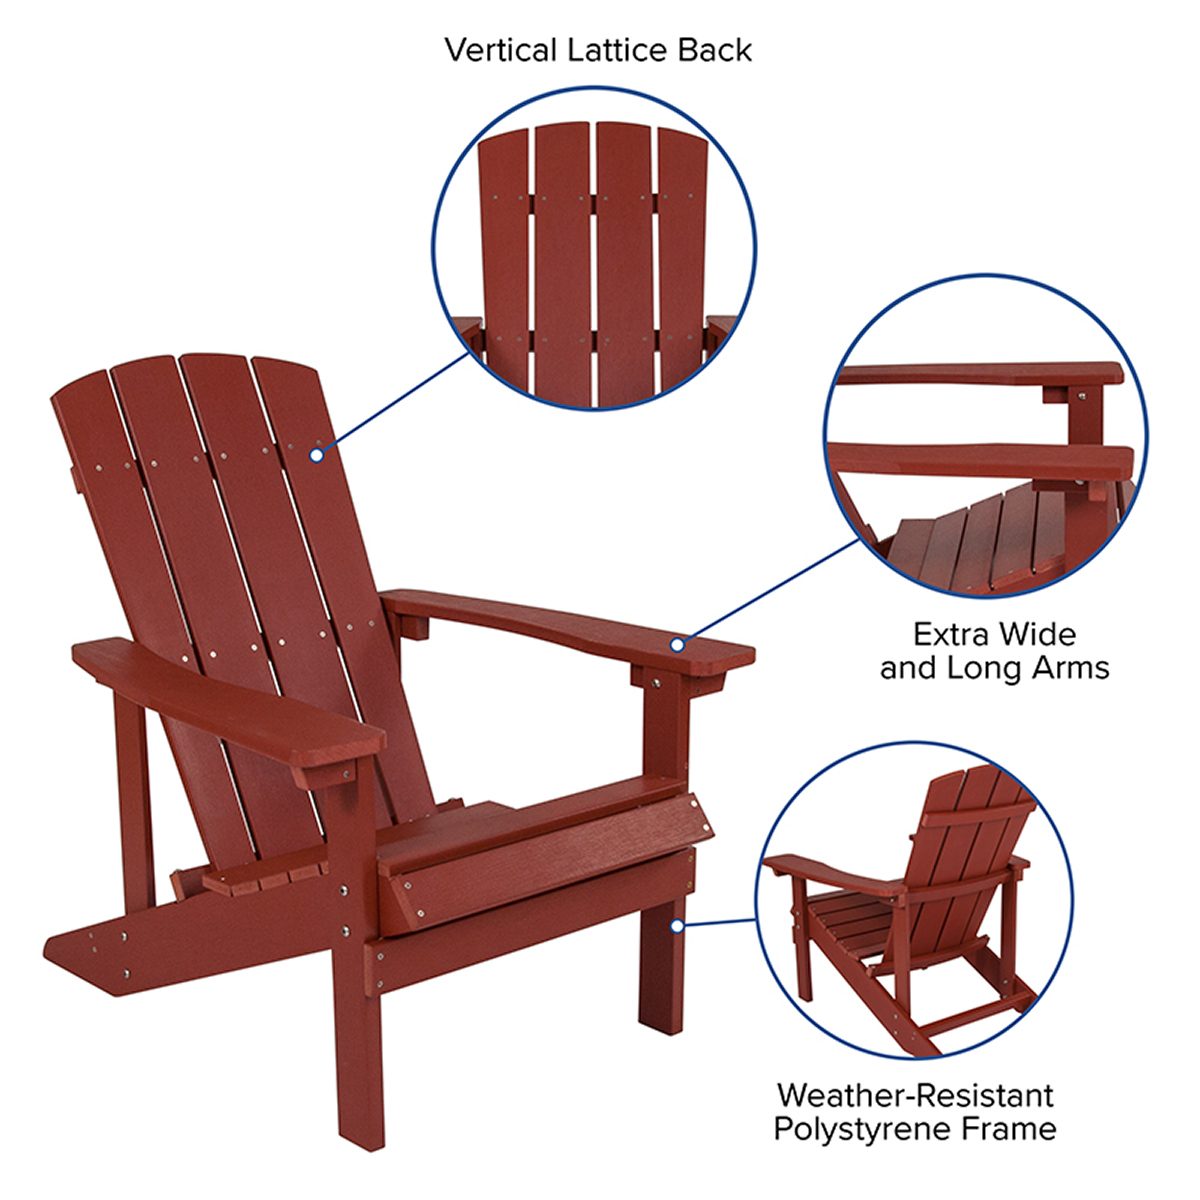 All-Weather Composite Wood Adirondack Chair, Poly-Resin, 7 Colors